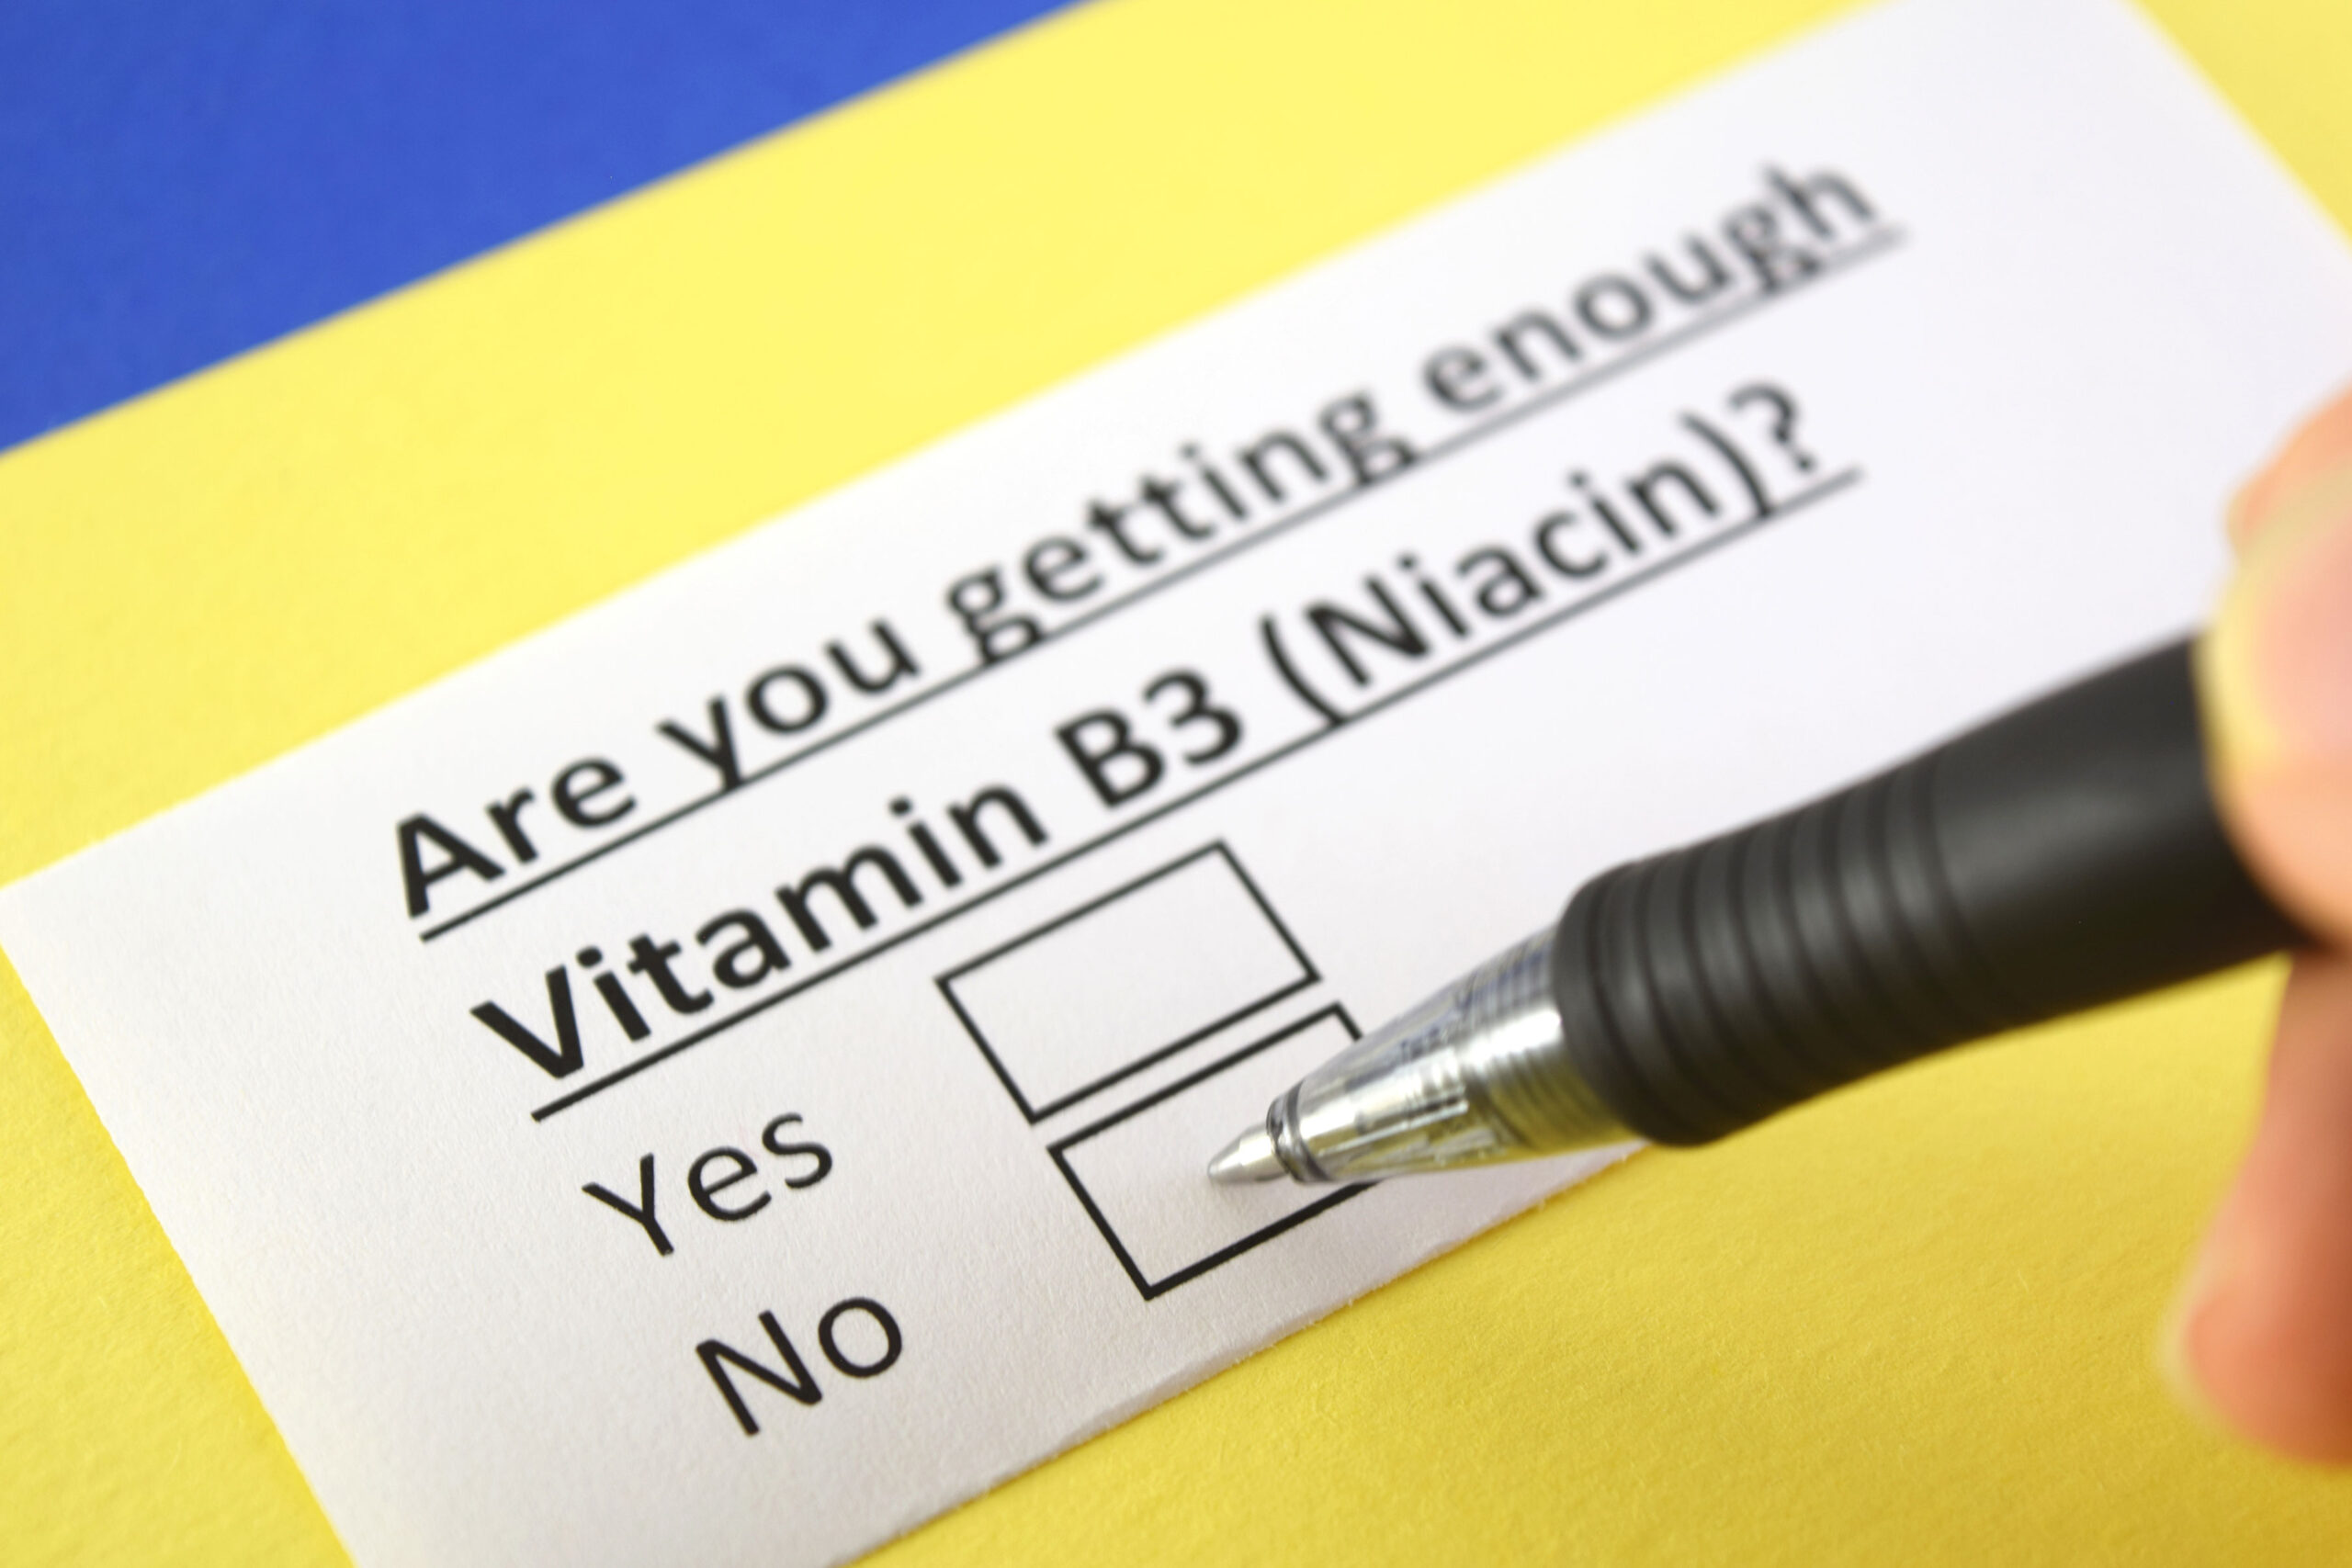 Discovering Niacin’s Bountiful Benefits: Vitamin B3 Is The Real Deal